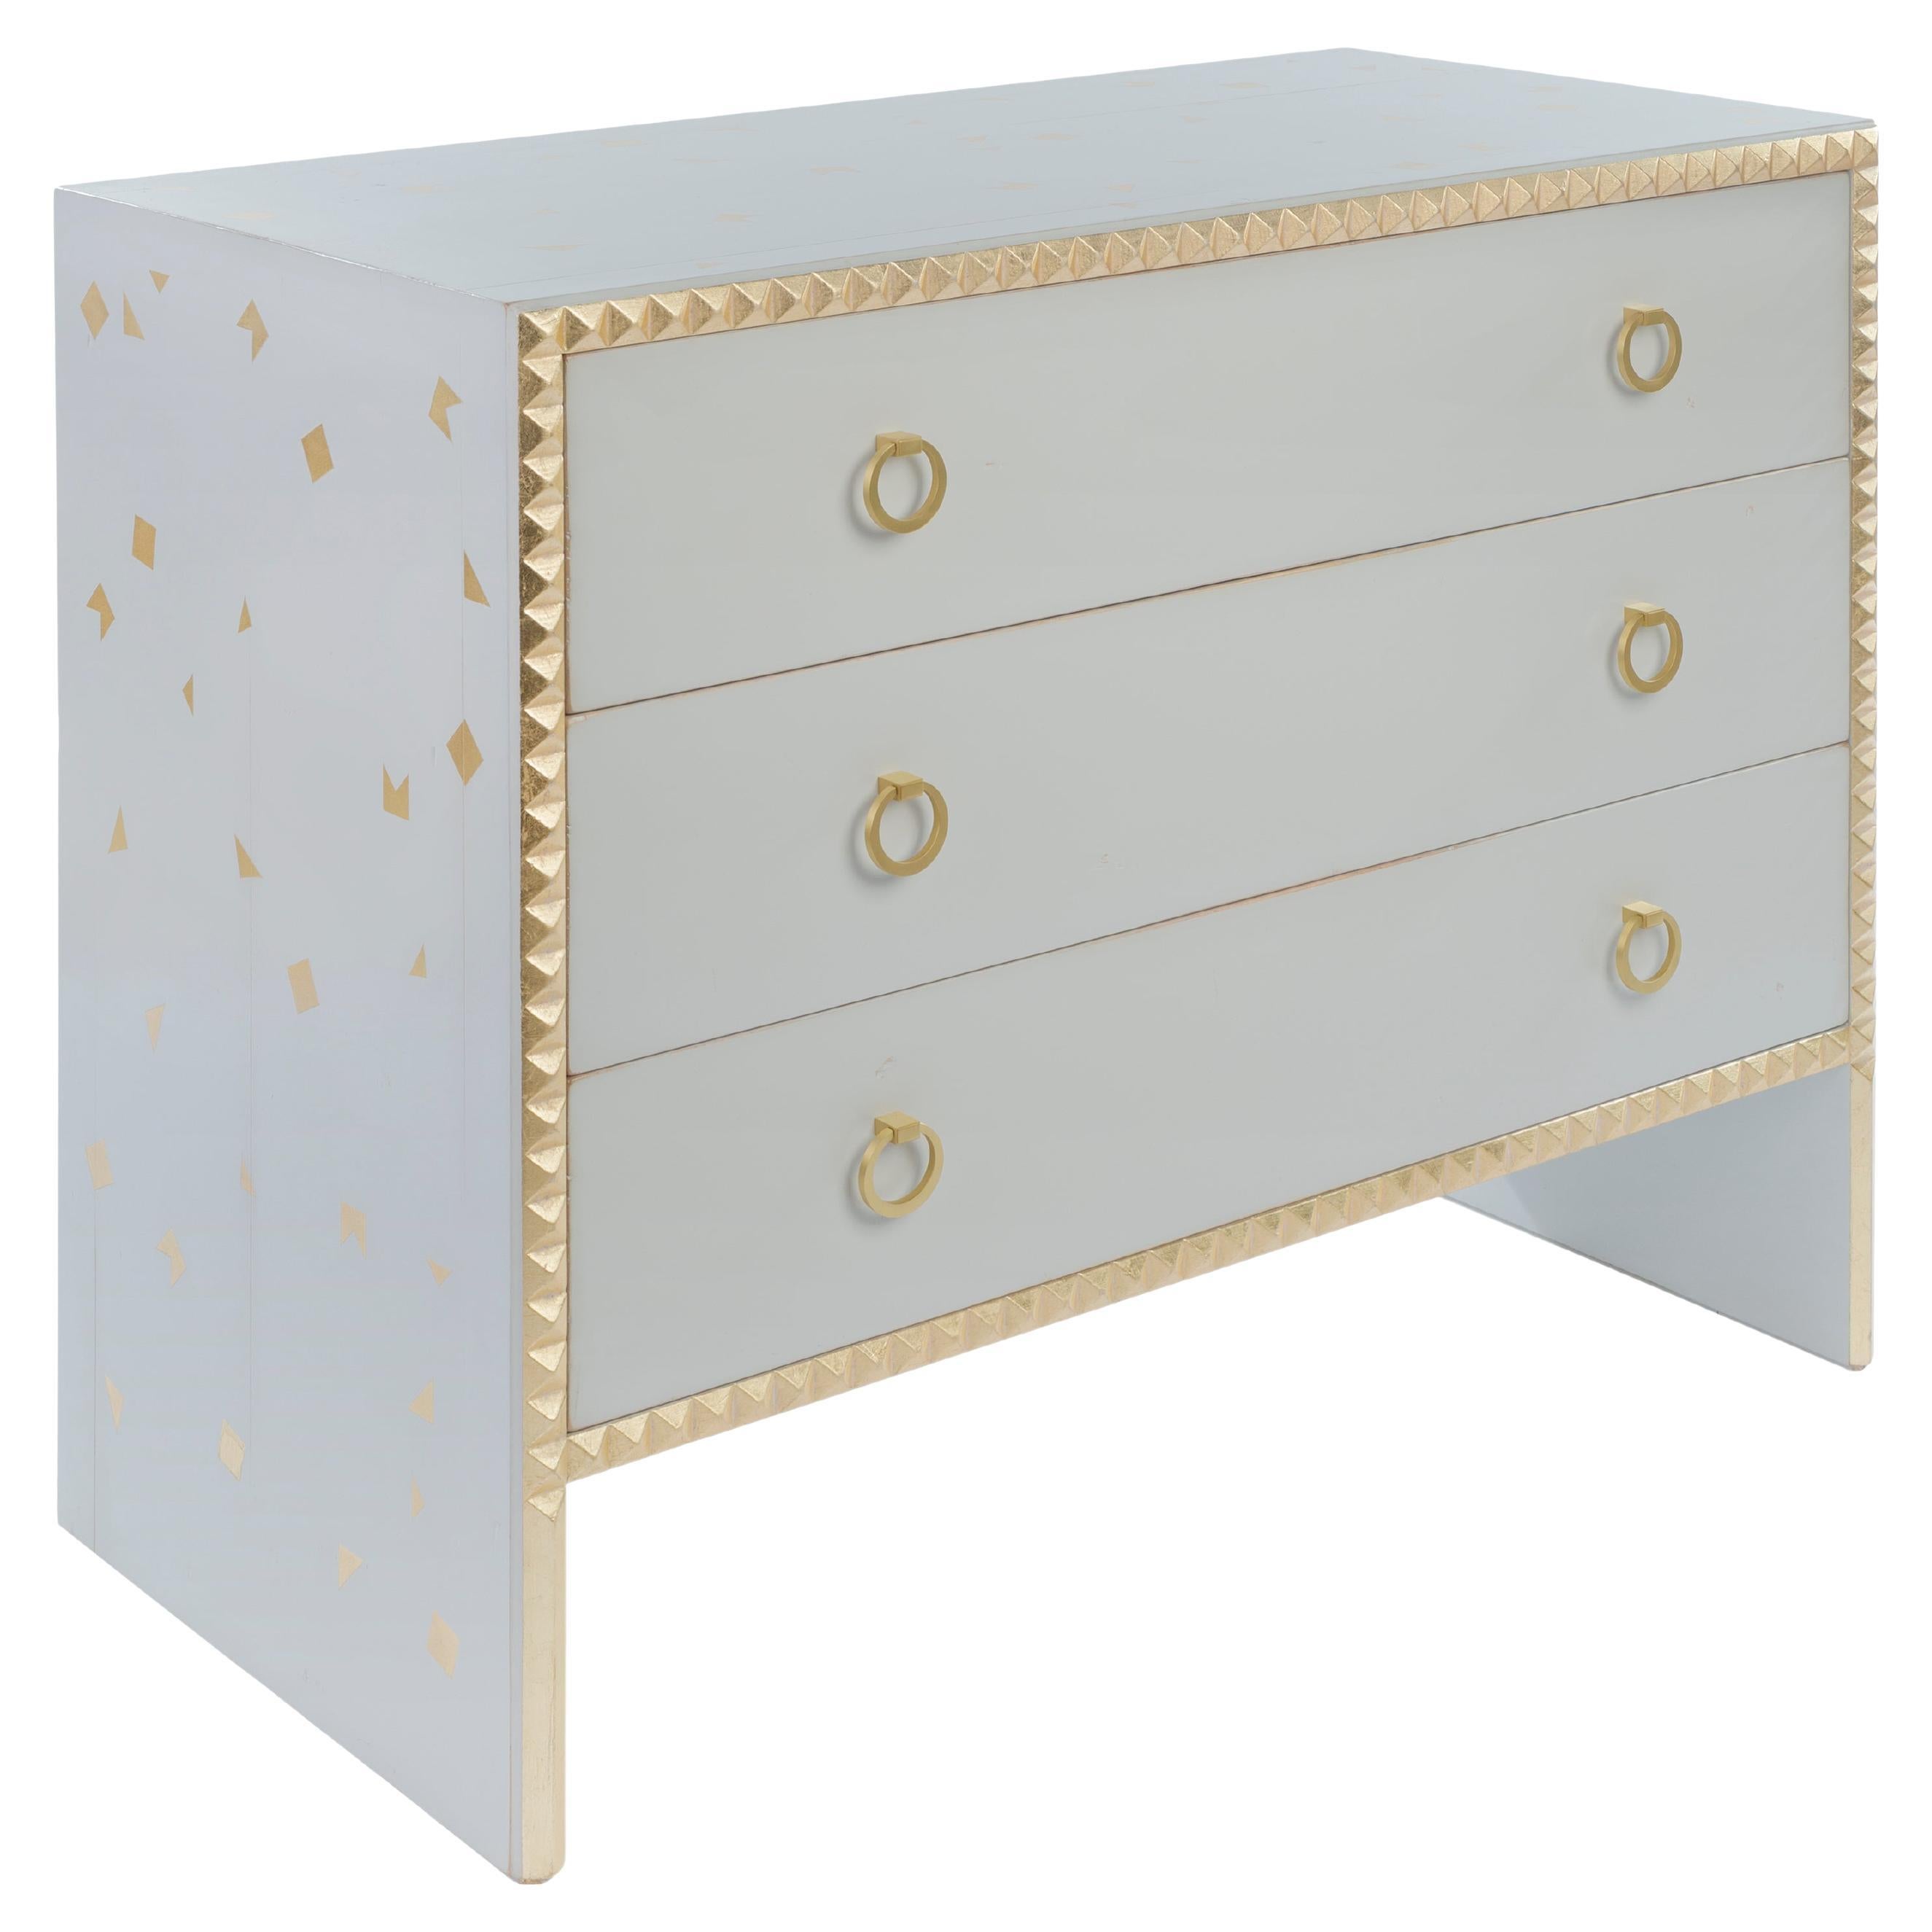 Rive Gauche Chest-of-Drawers by Pierre Gonalons